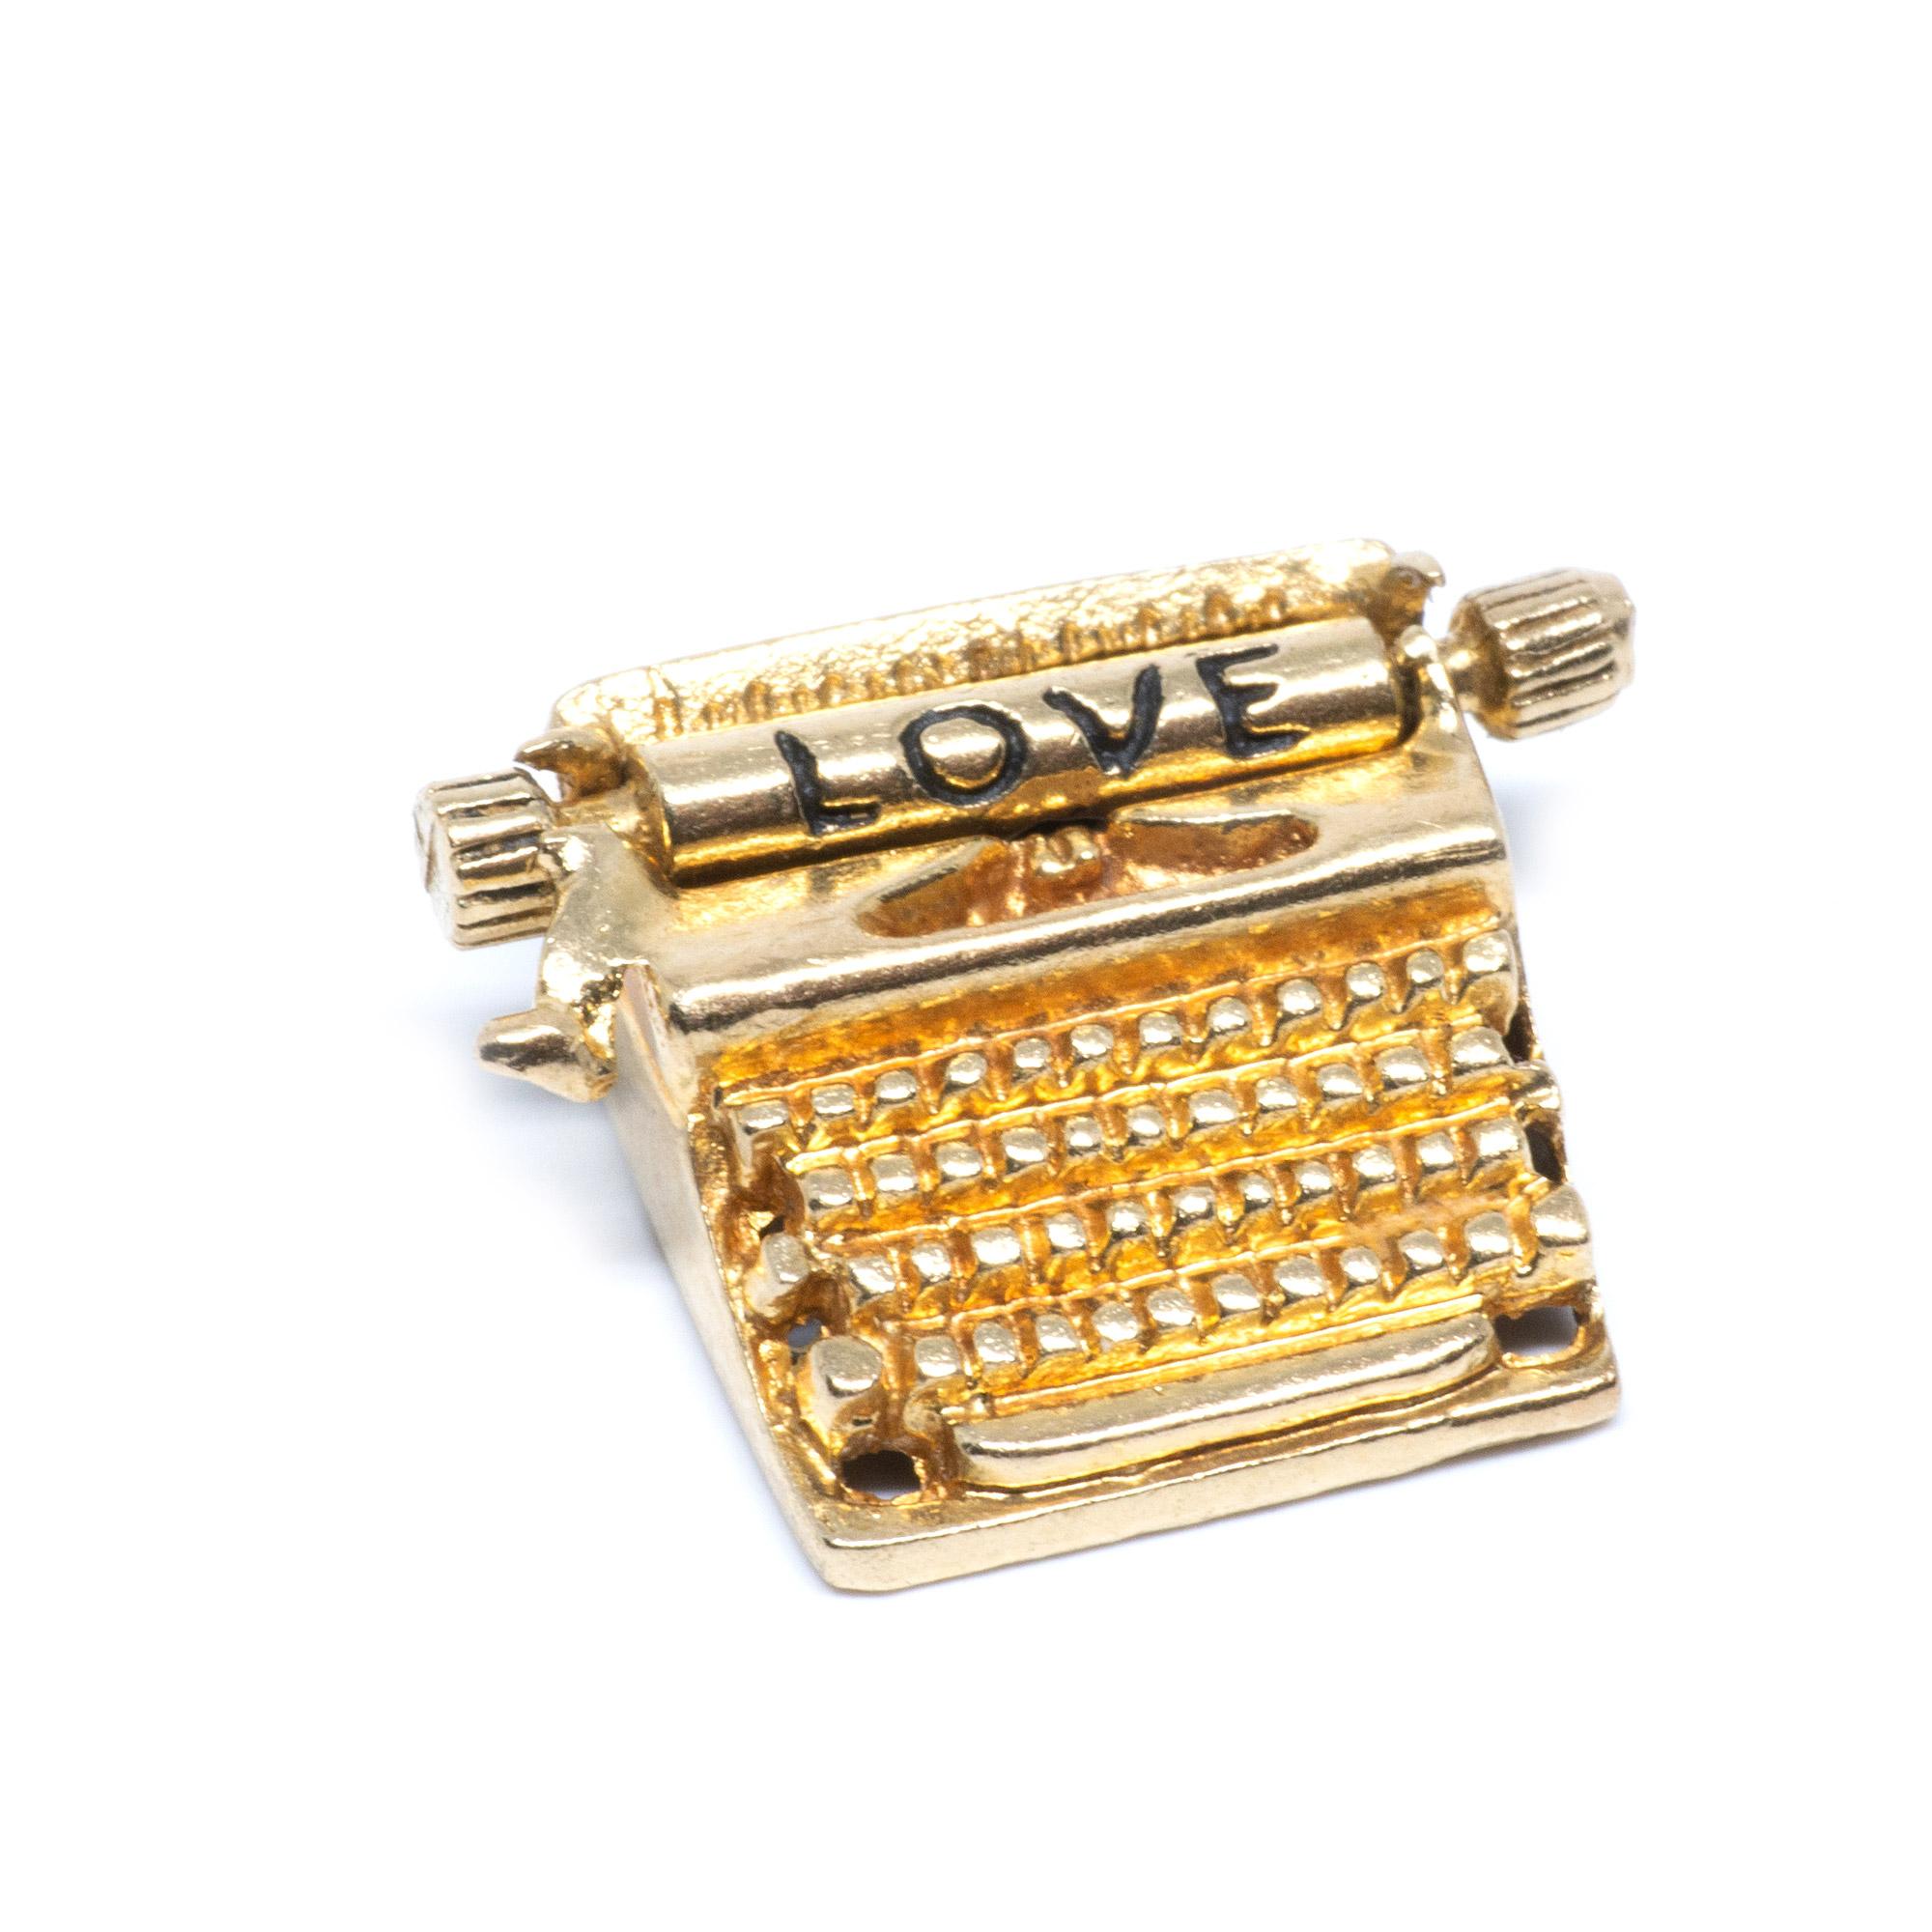 Click Clack I Love You. These words have been typed since the invention of typing. Show that special someone that you have a timeless love with this adorable charm. 

Charm details:
Metal: 14 Karat Yellow Gold
Weight: 2.9 grams

Payment & Refund